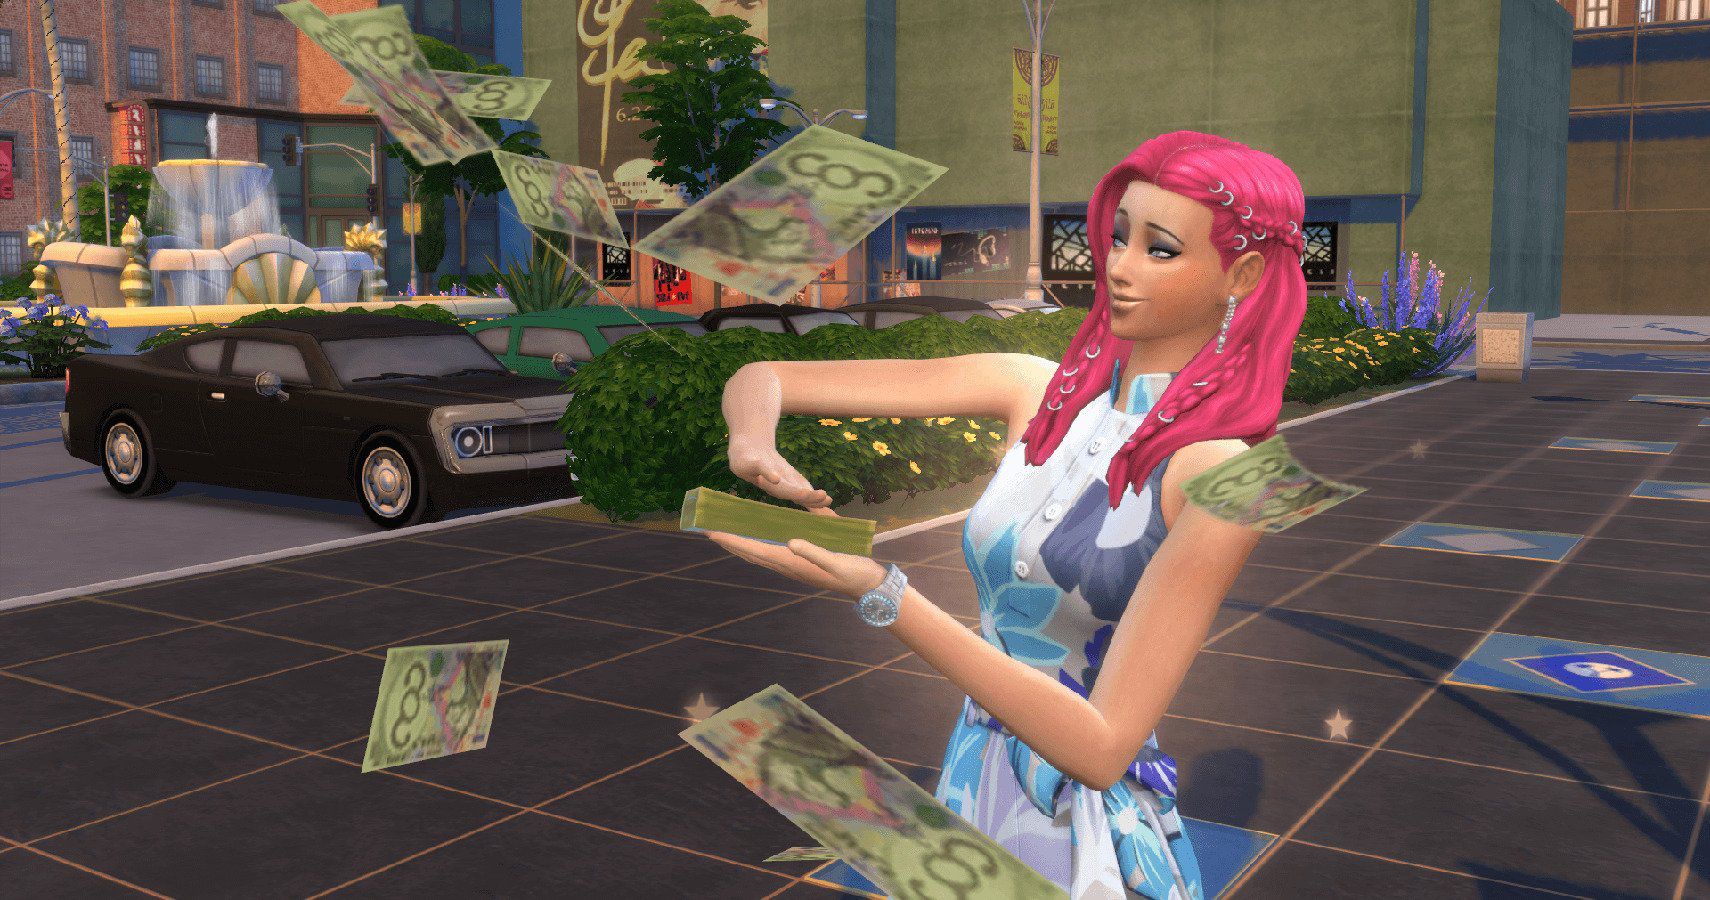 sims 4 making money without a job